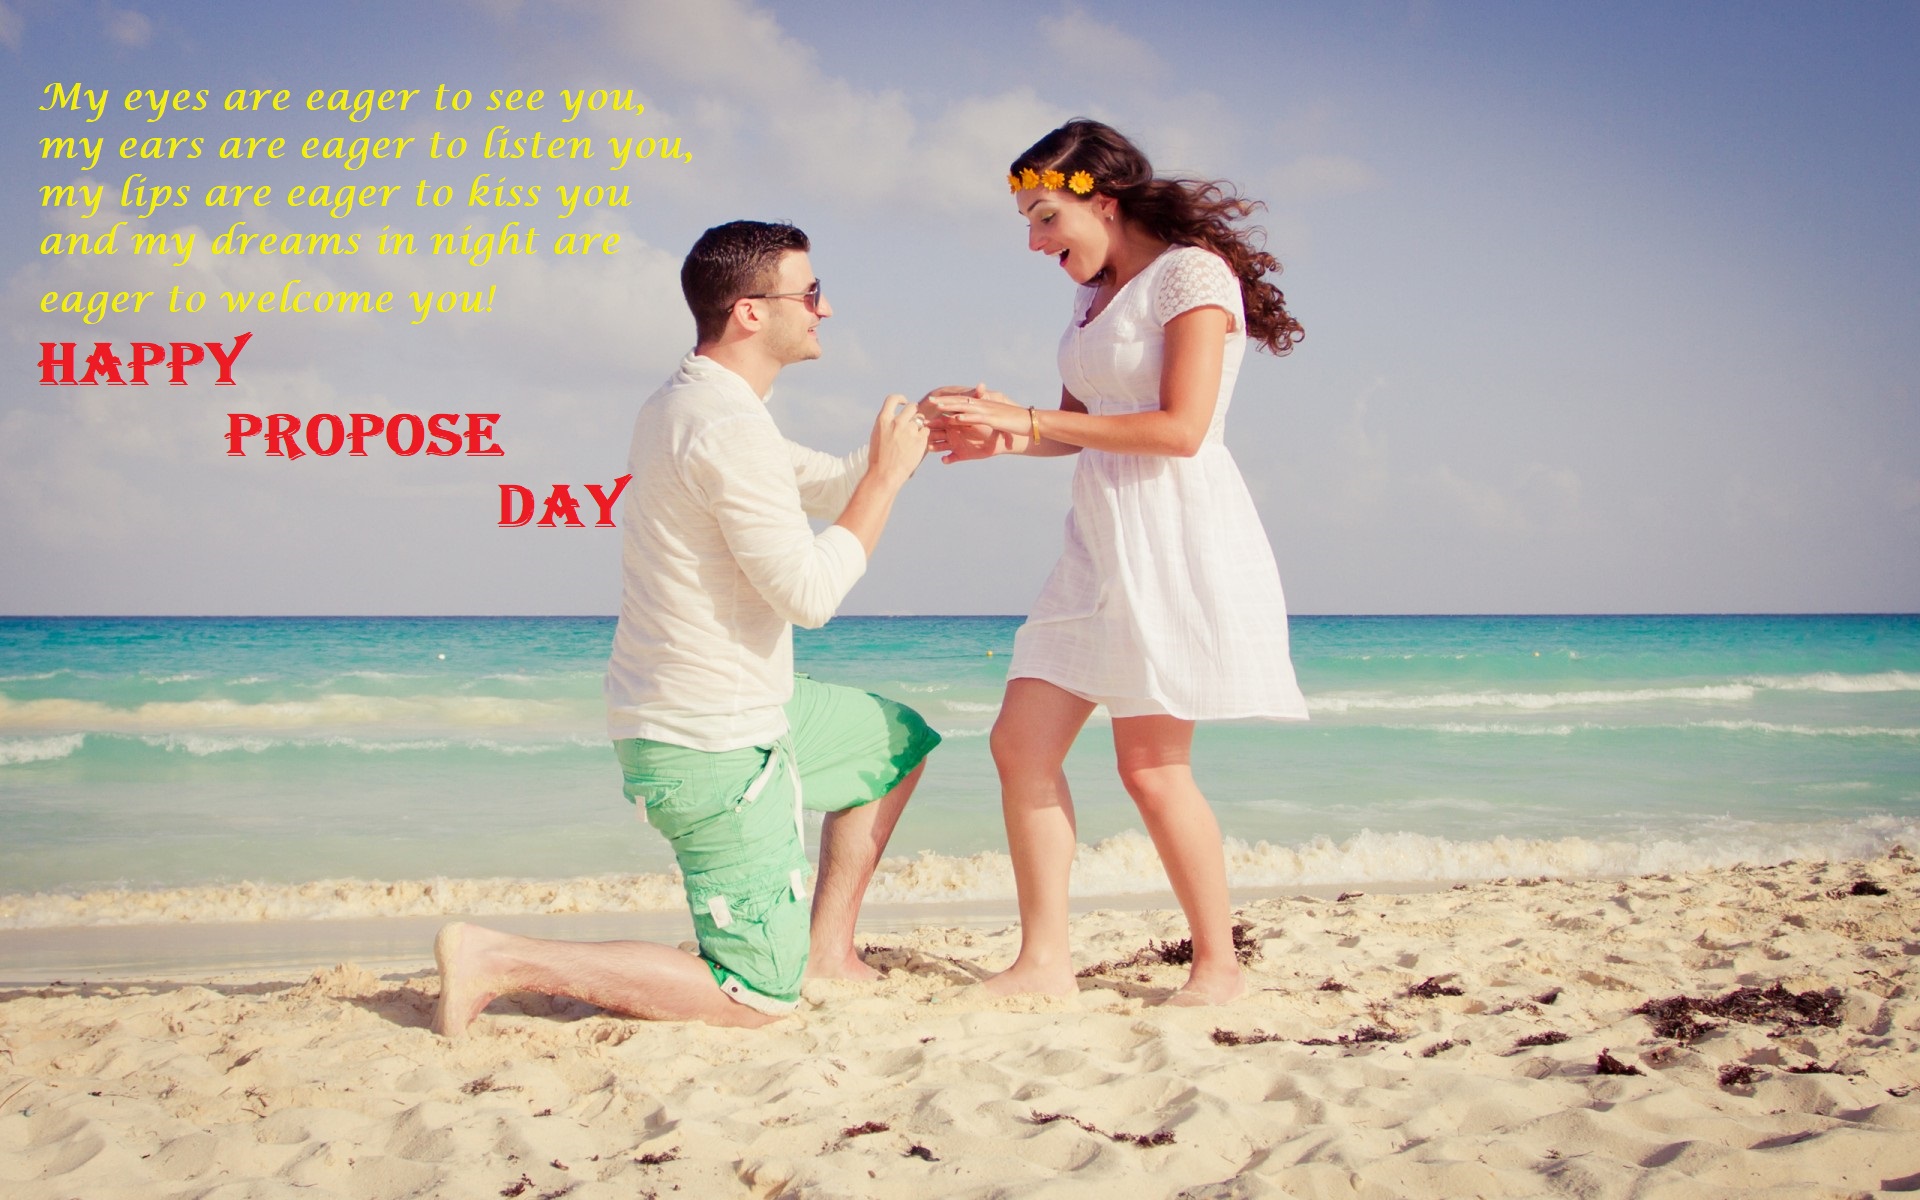  Happy Propose Day